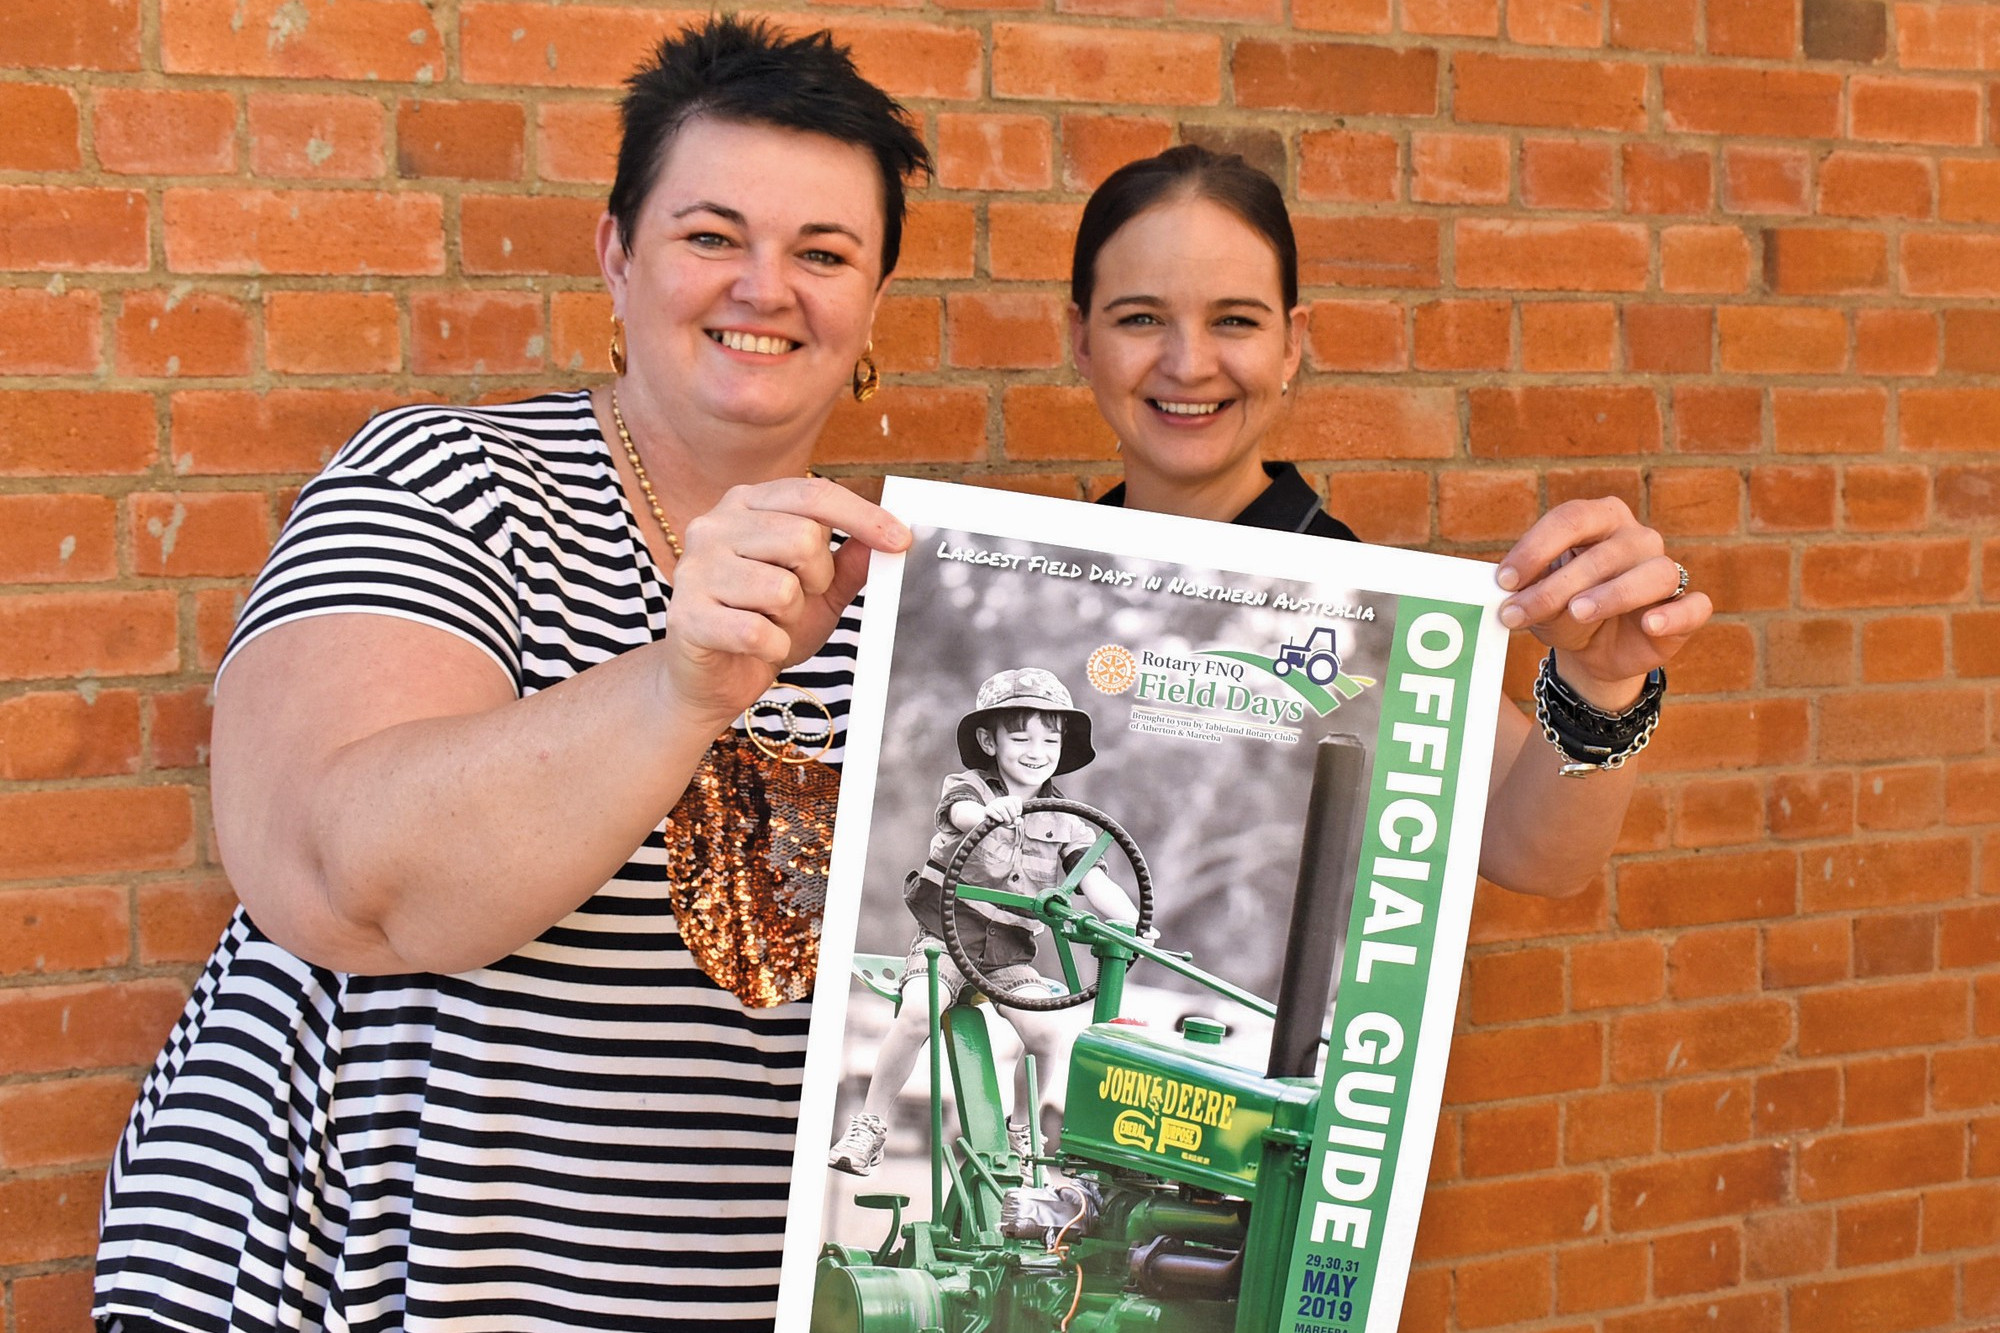 Field Days guide hits the streets - feature photo